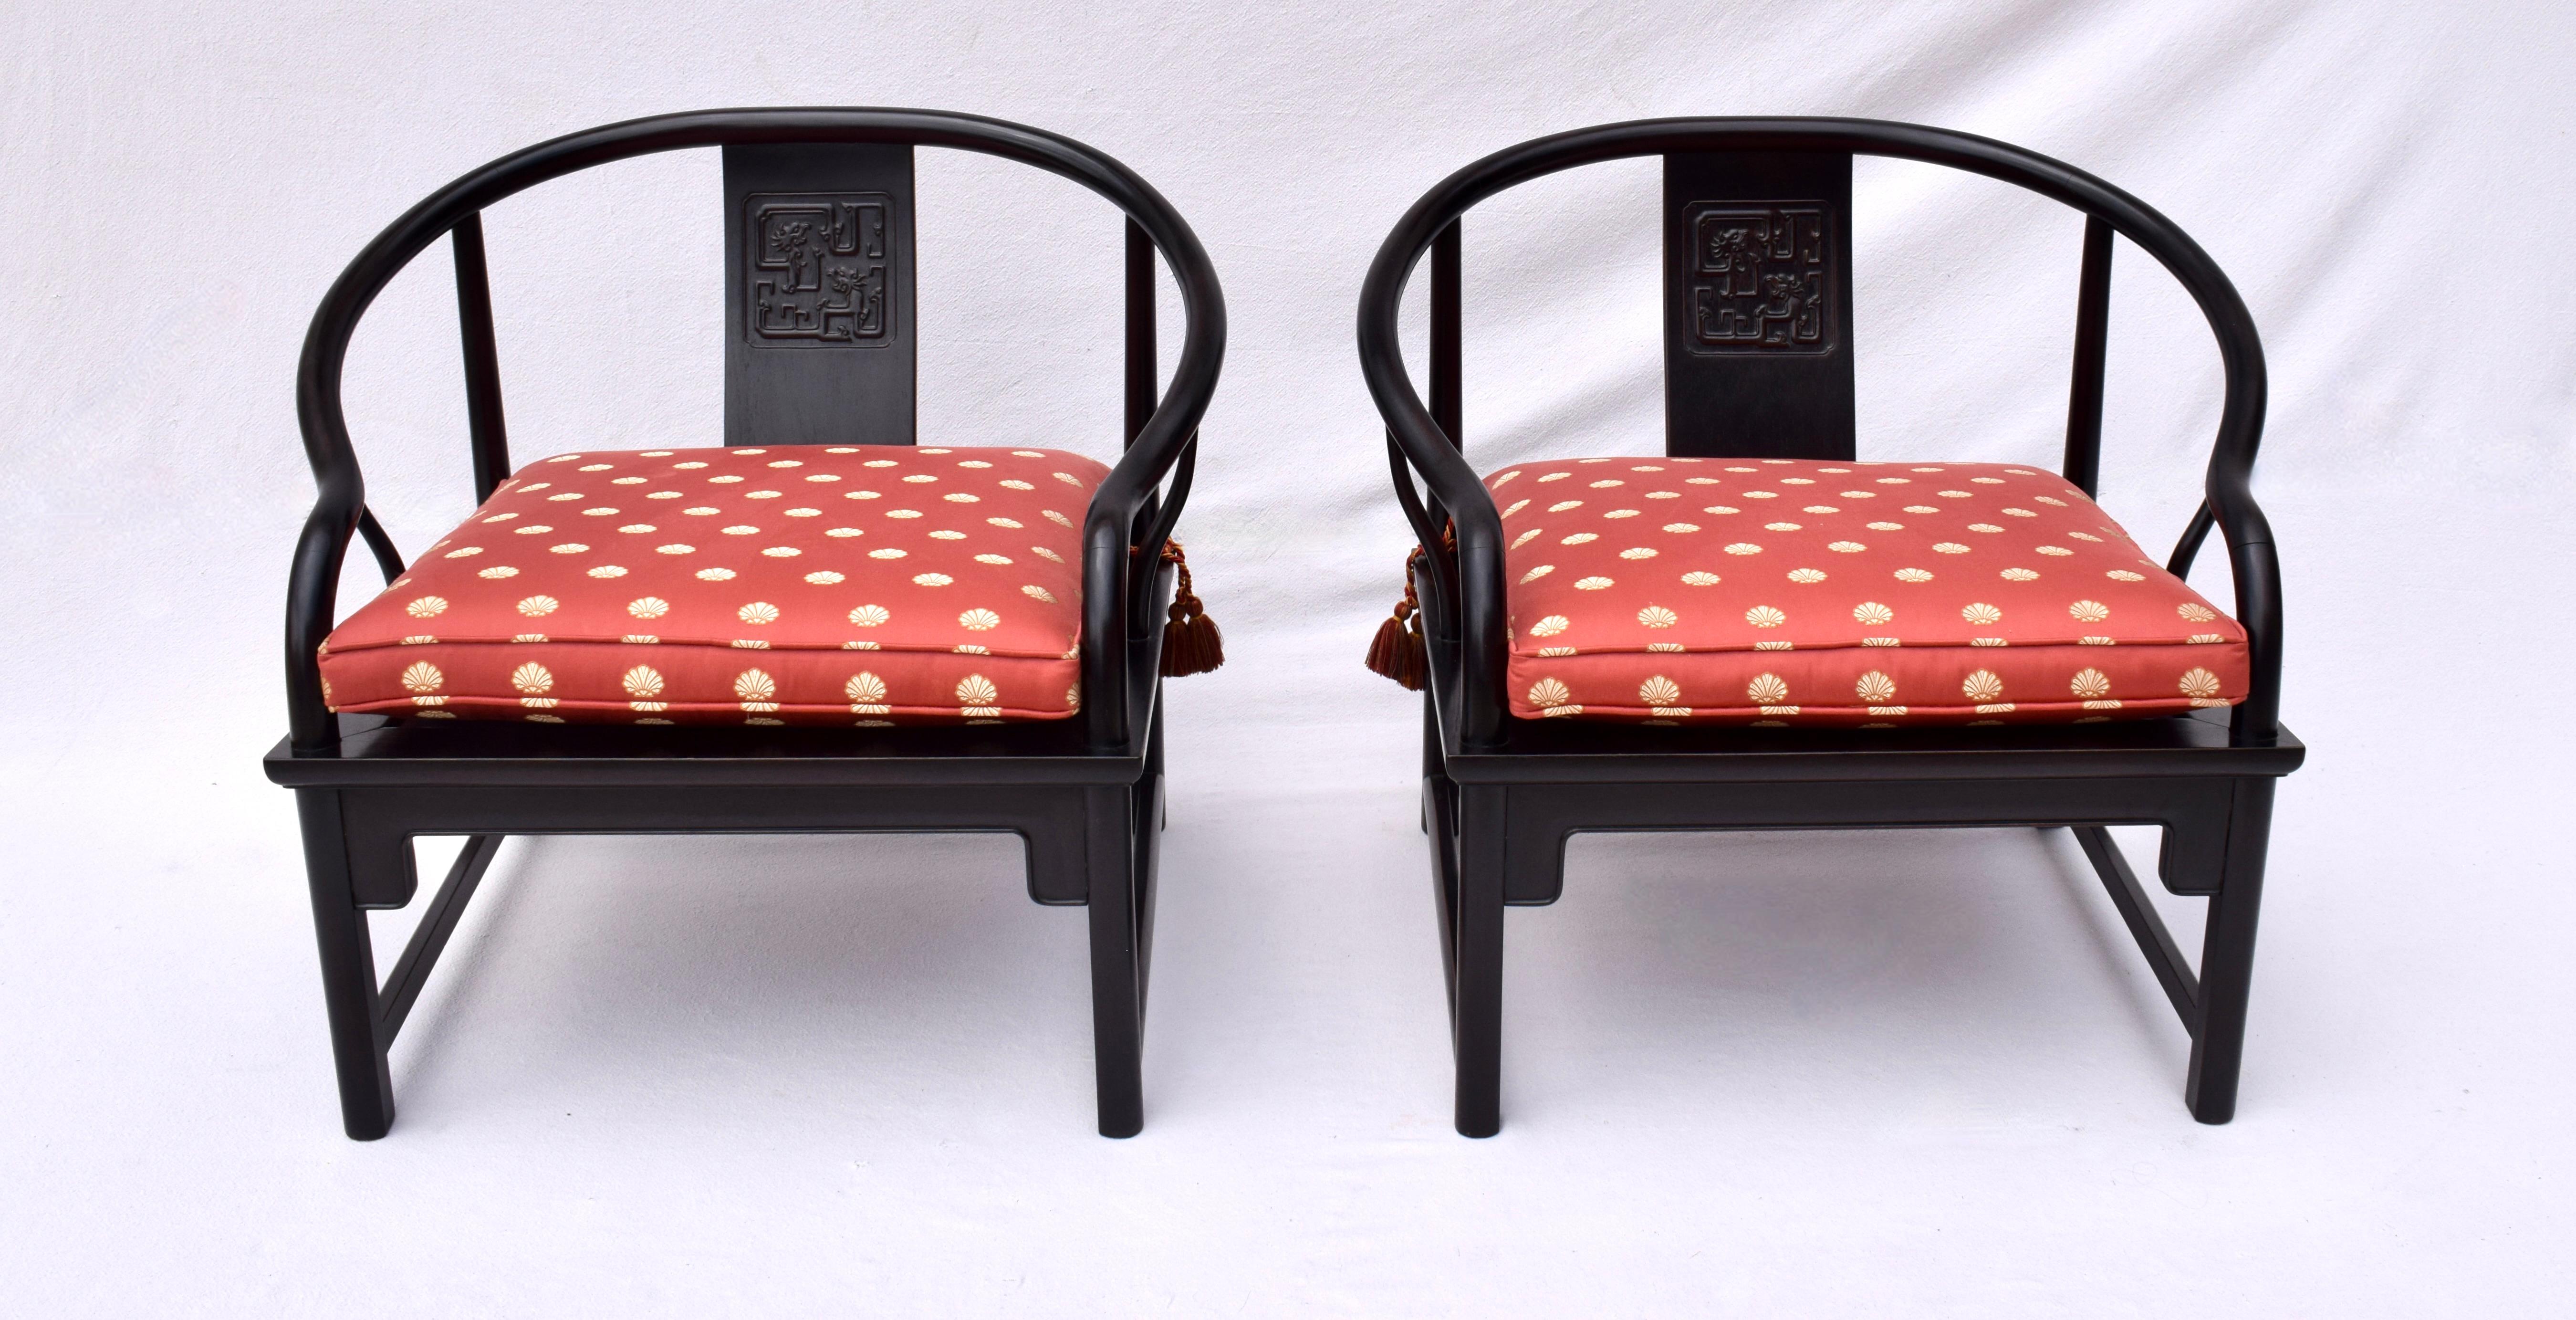 Chinoiserie Mid 20th Century Ebony Horseshoe Lounge Chairs For Sale